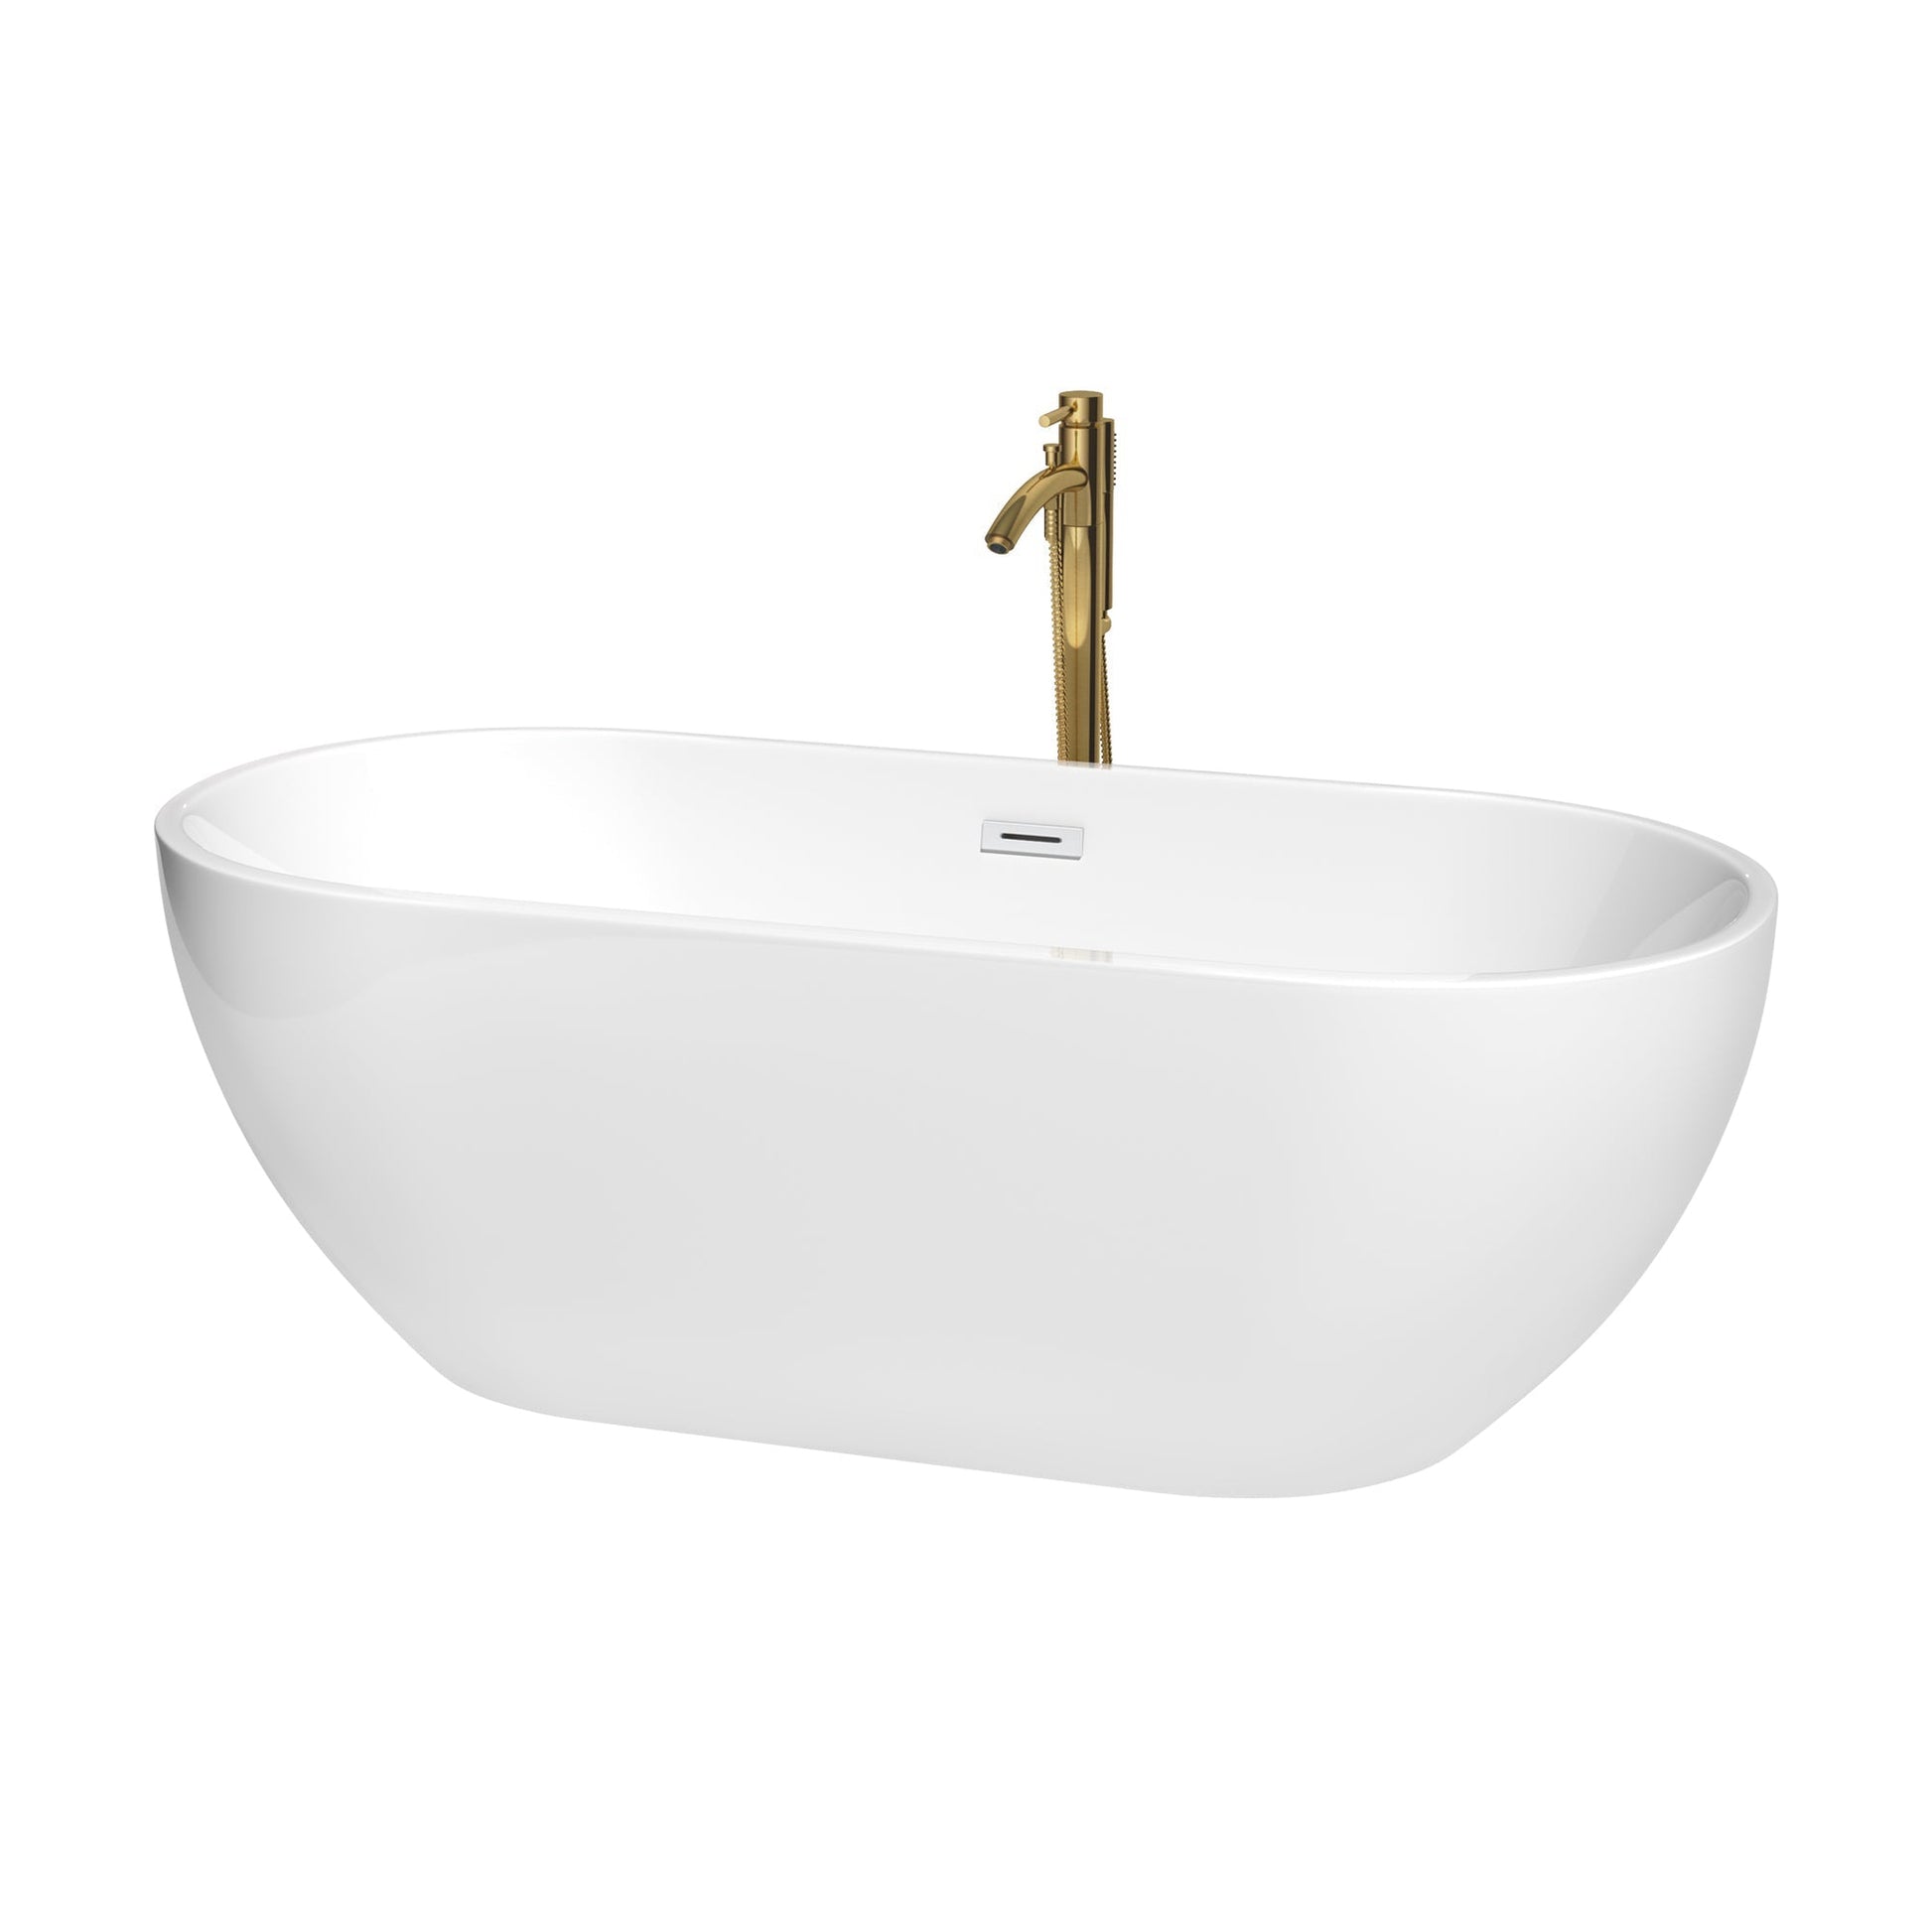 Wyndham Collection Brooklyn 67" Freestanding Bathtub in White With Shiny White Trim and Floor Mounted Faucet in Brushed Gold